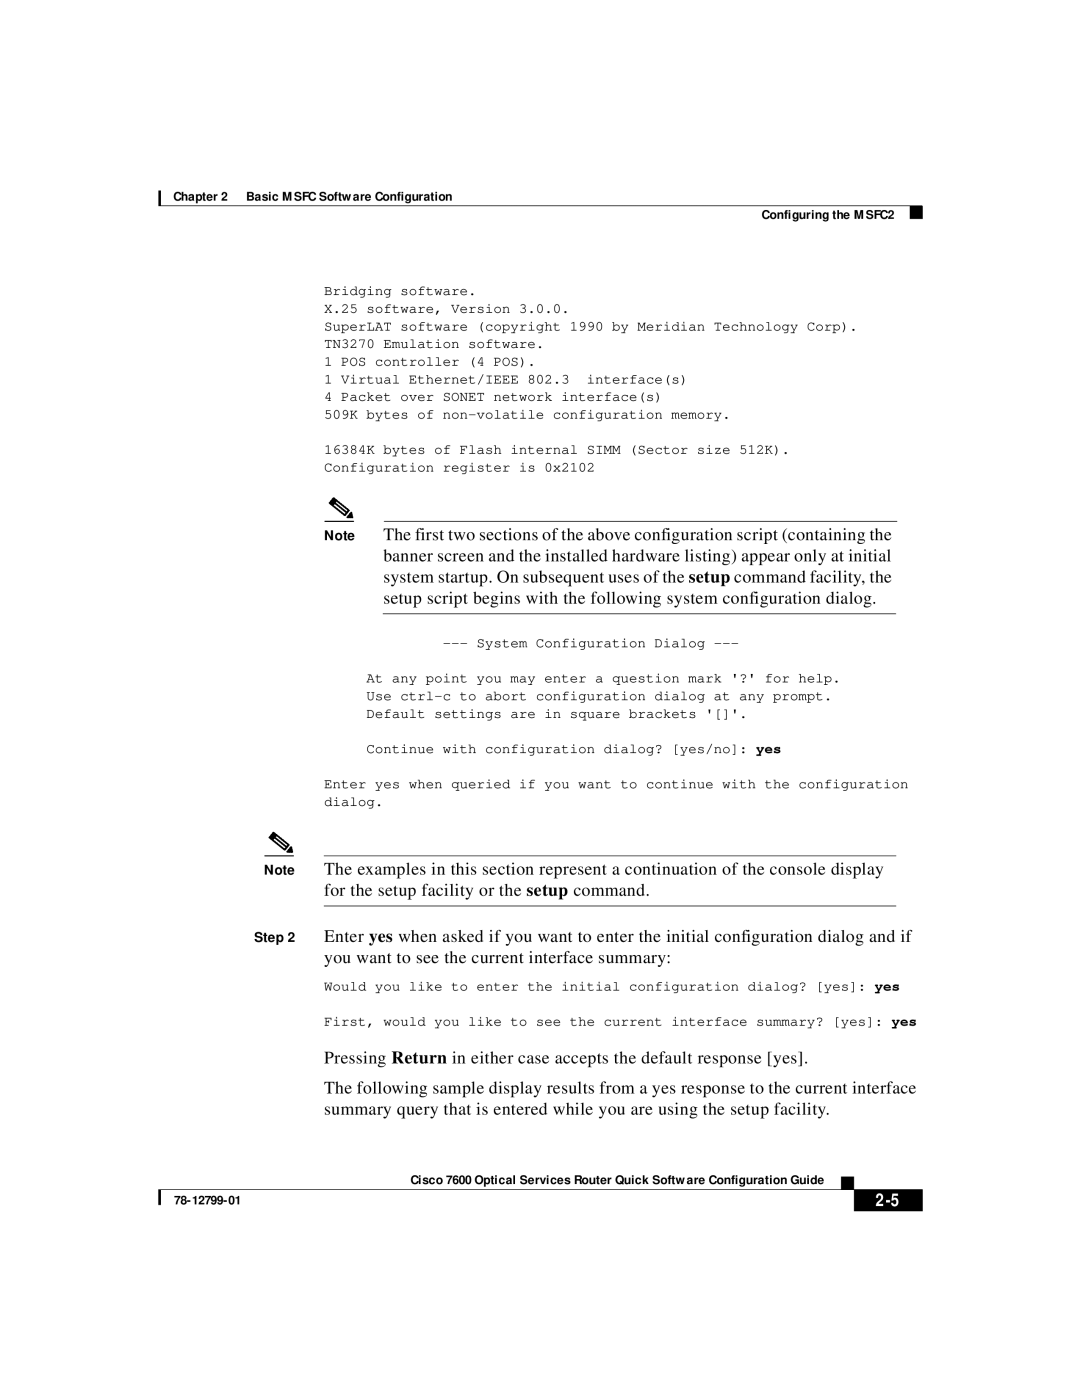 Cisco Systems 7600 manual Pressing Return in either case accepts the default response yes 